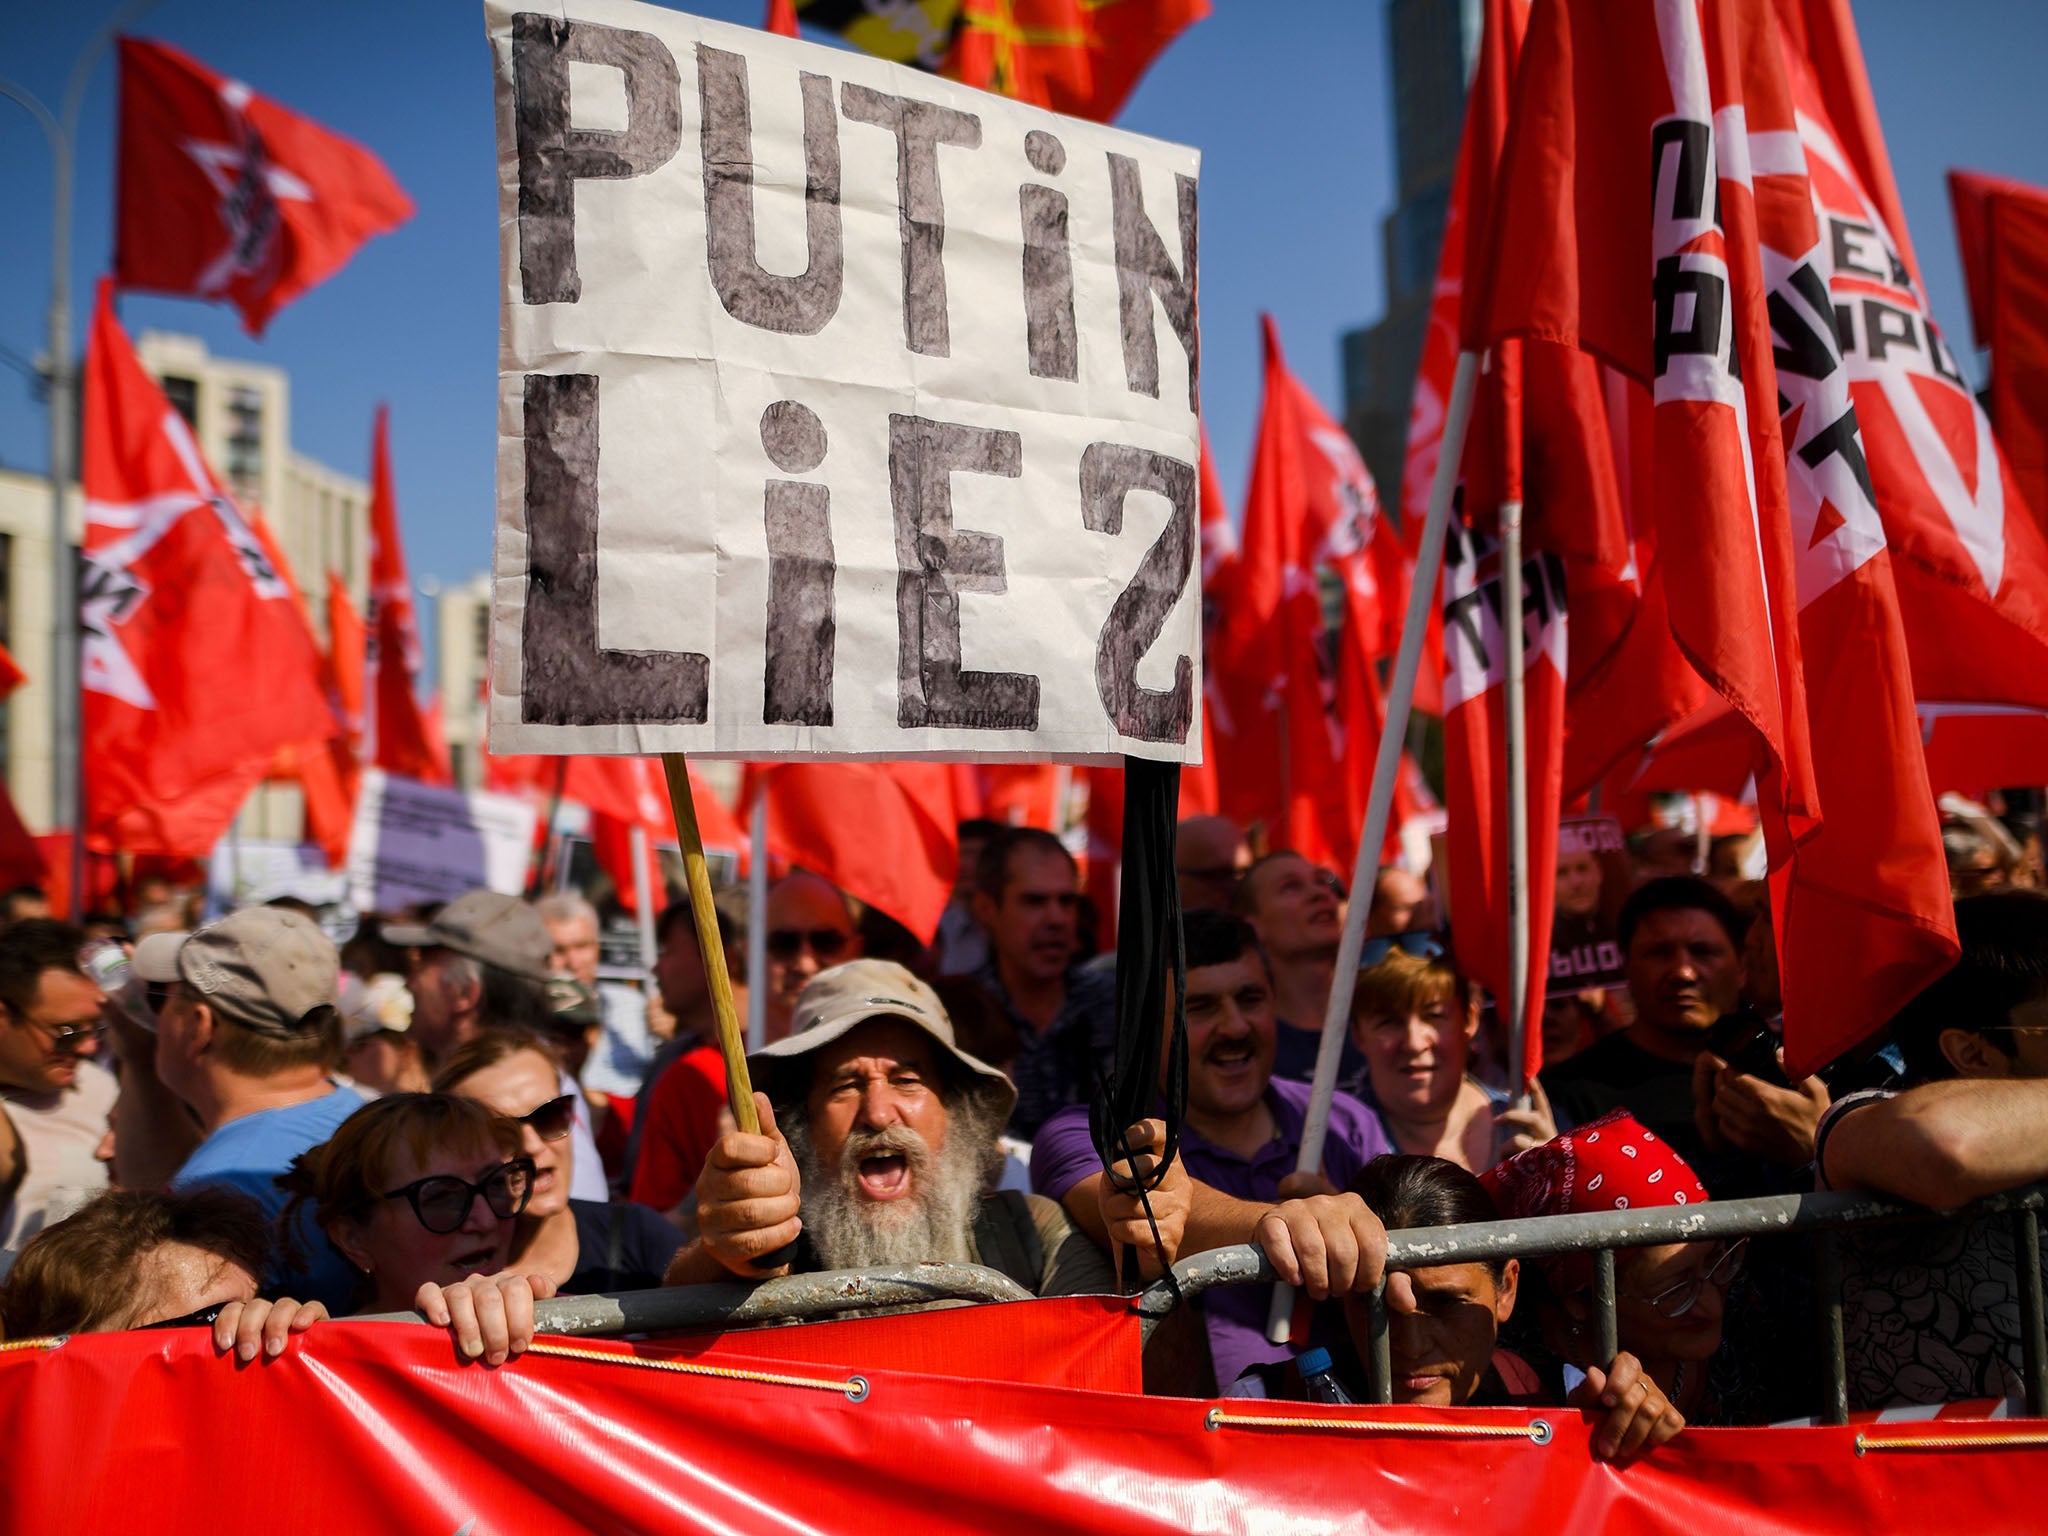 Russian Communist party supporters at a protest in September against raising the retirement age (AFP/Getty)